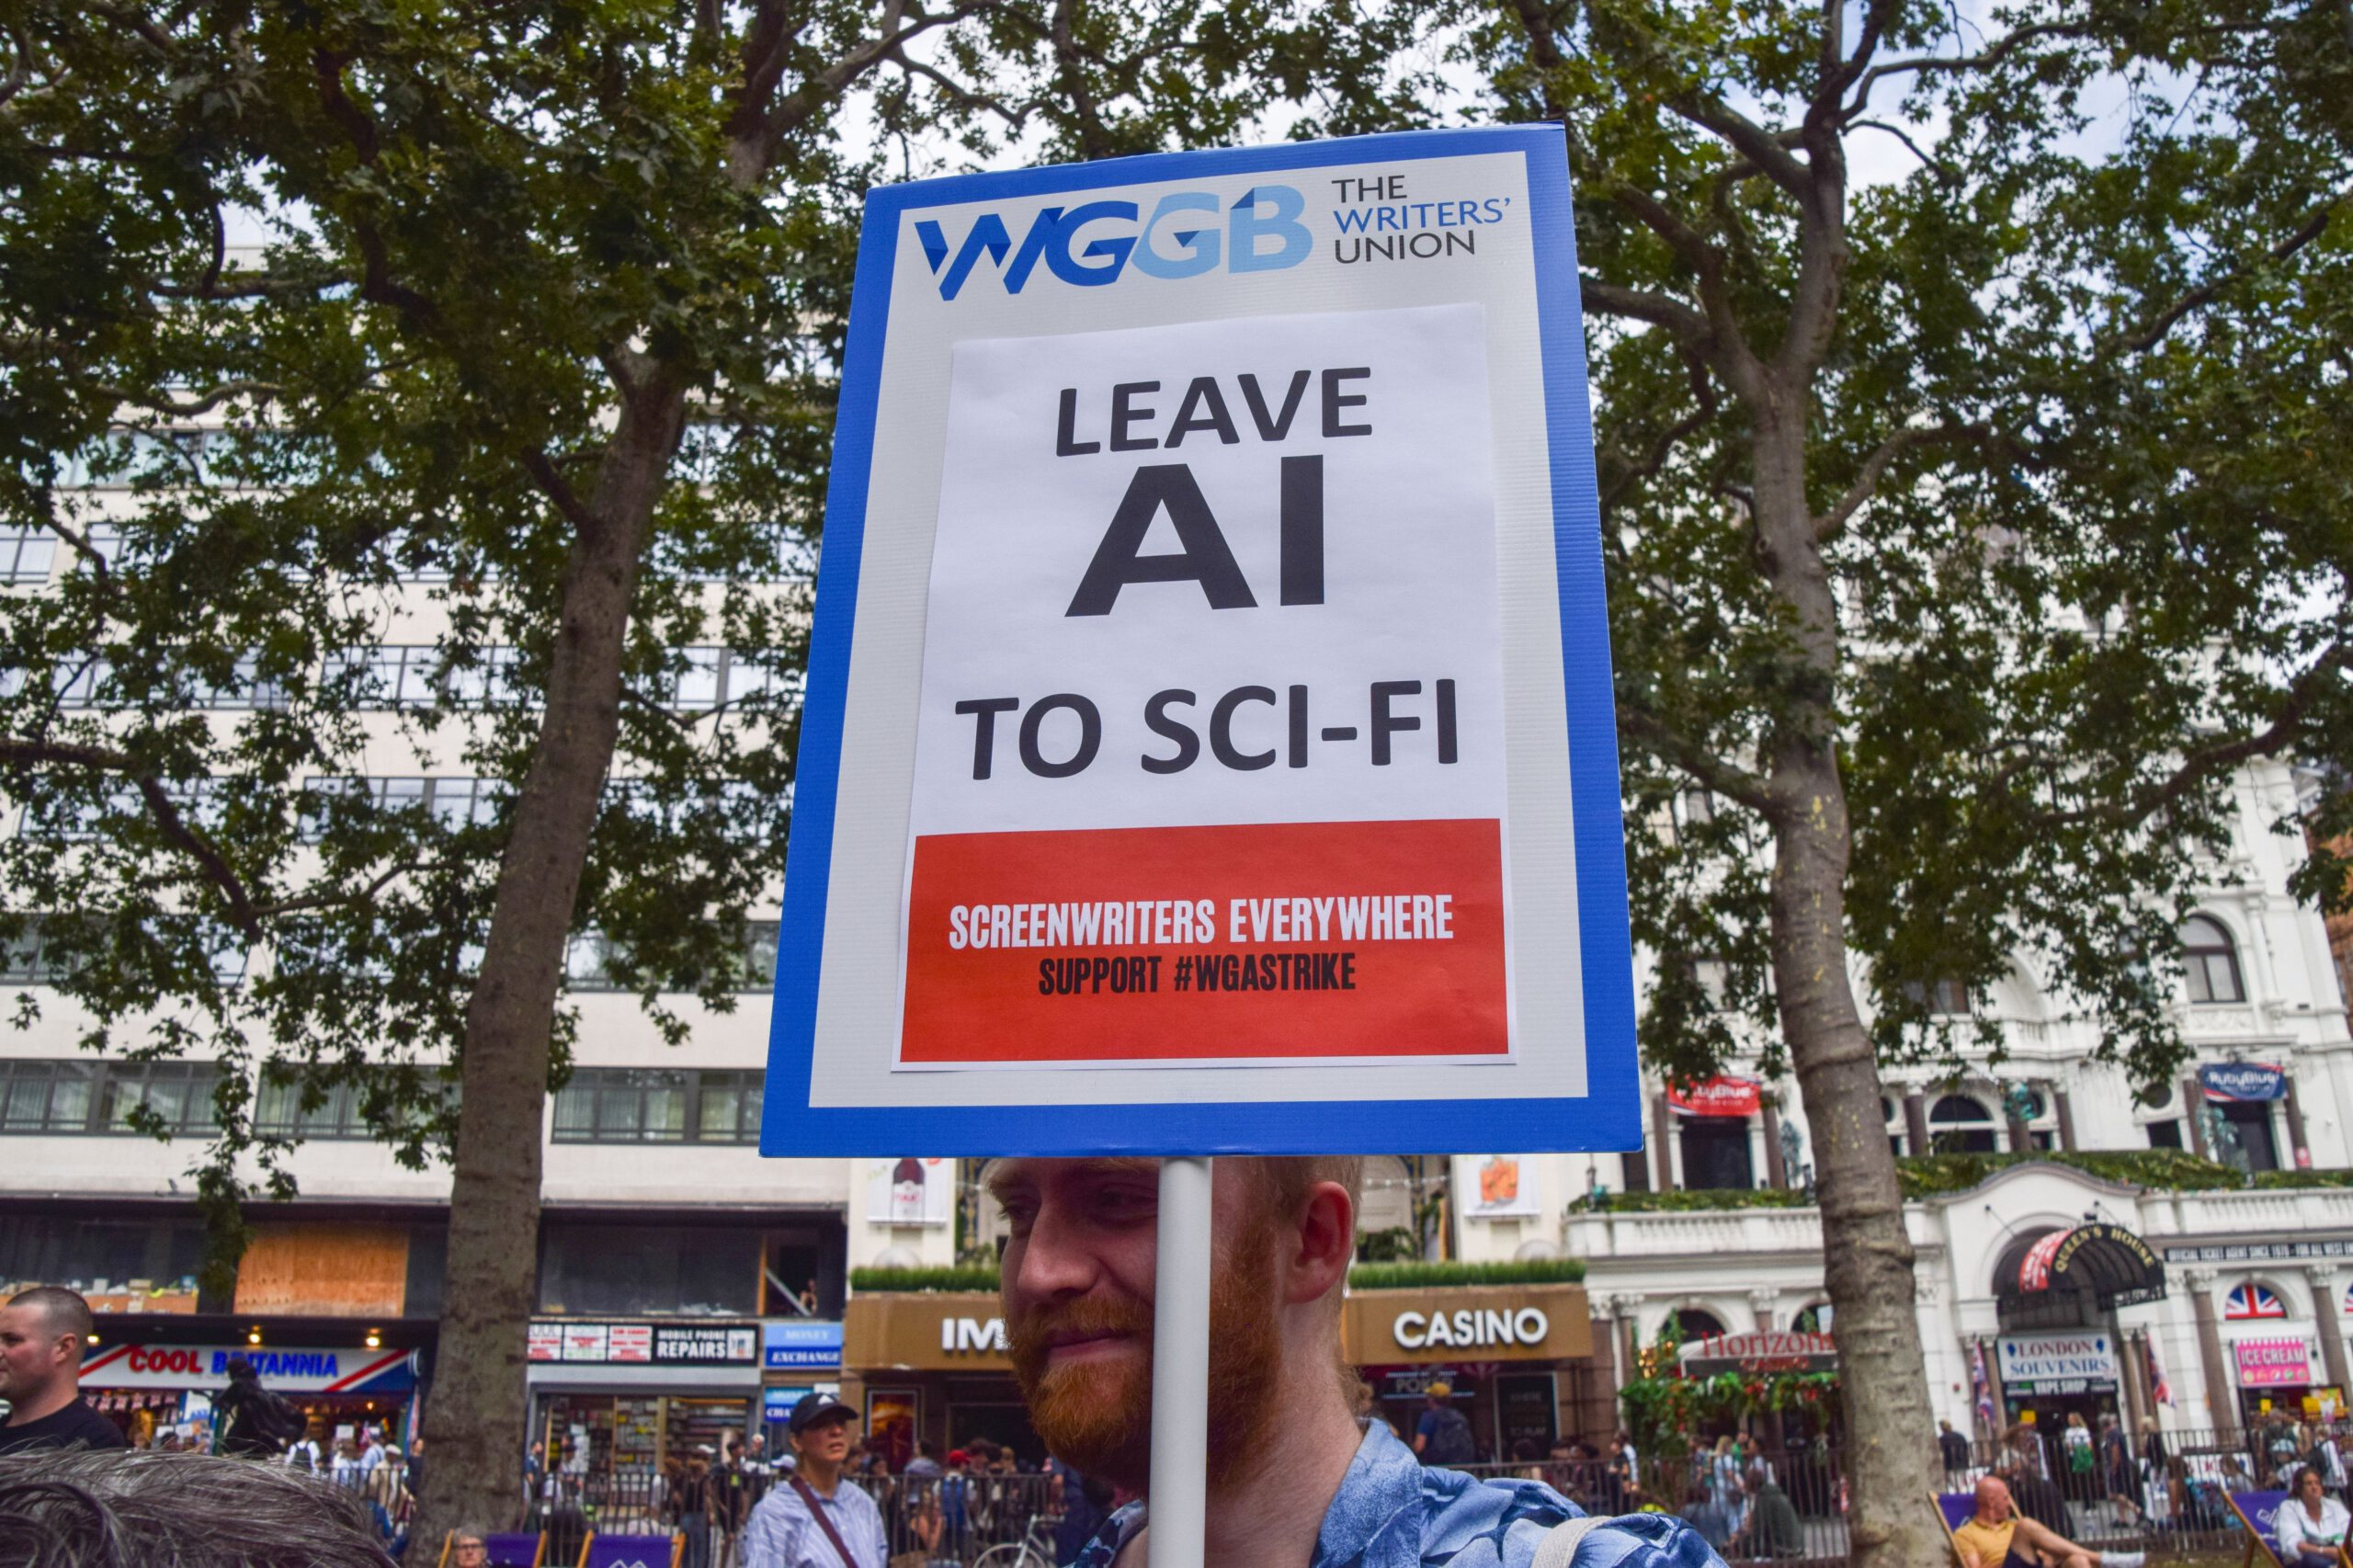 LONDON, UNITED KINGDOM - 2023/07/21: A protester holds a placard opposed to AI (Artificial Intelligence) replacing writers, during the demonstration. Performing arts and entertainment industries union Equity staged a rally in Leicester Square in solidarity with the SAG-AFTRA (Screen Actors Guild American Federation of Television and Radio Artists) strike.